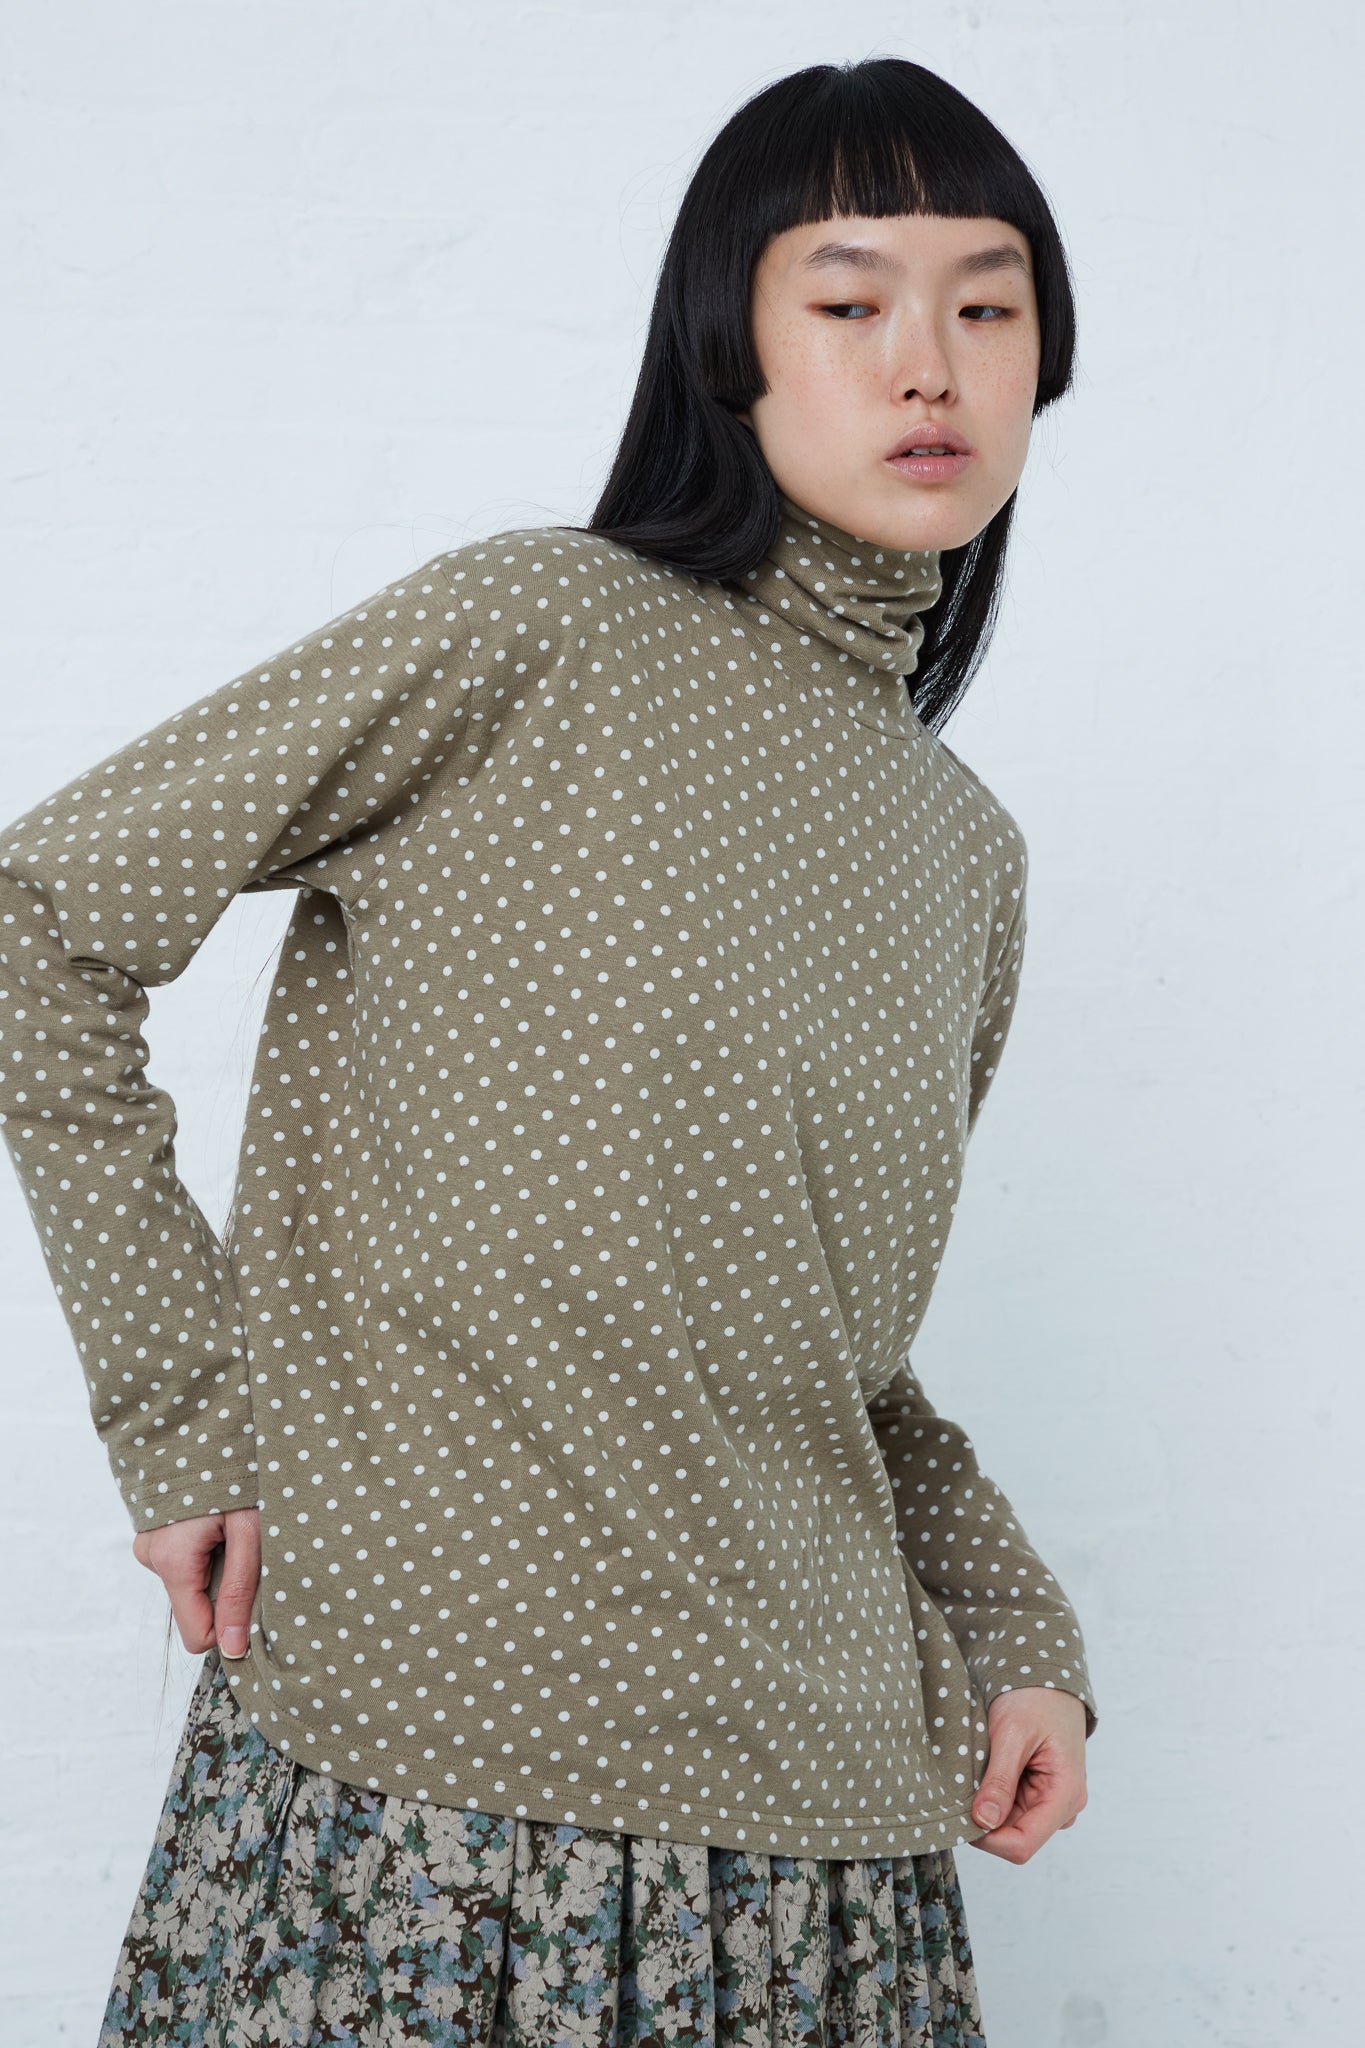 A woman wearing an Ichi Cotton Polka Dot Pullover Turtleneck in Khaki and floral skirt in a relaxed fit.